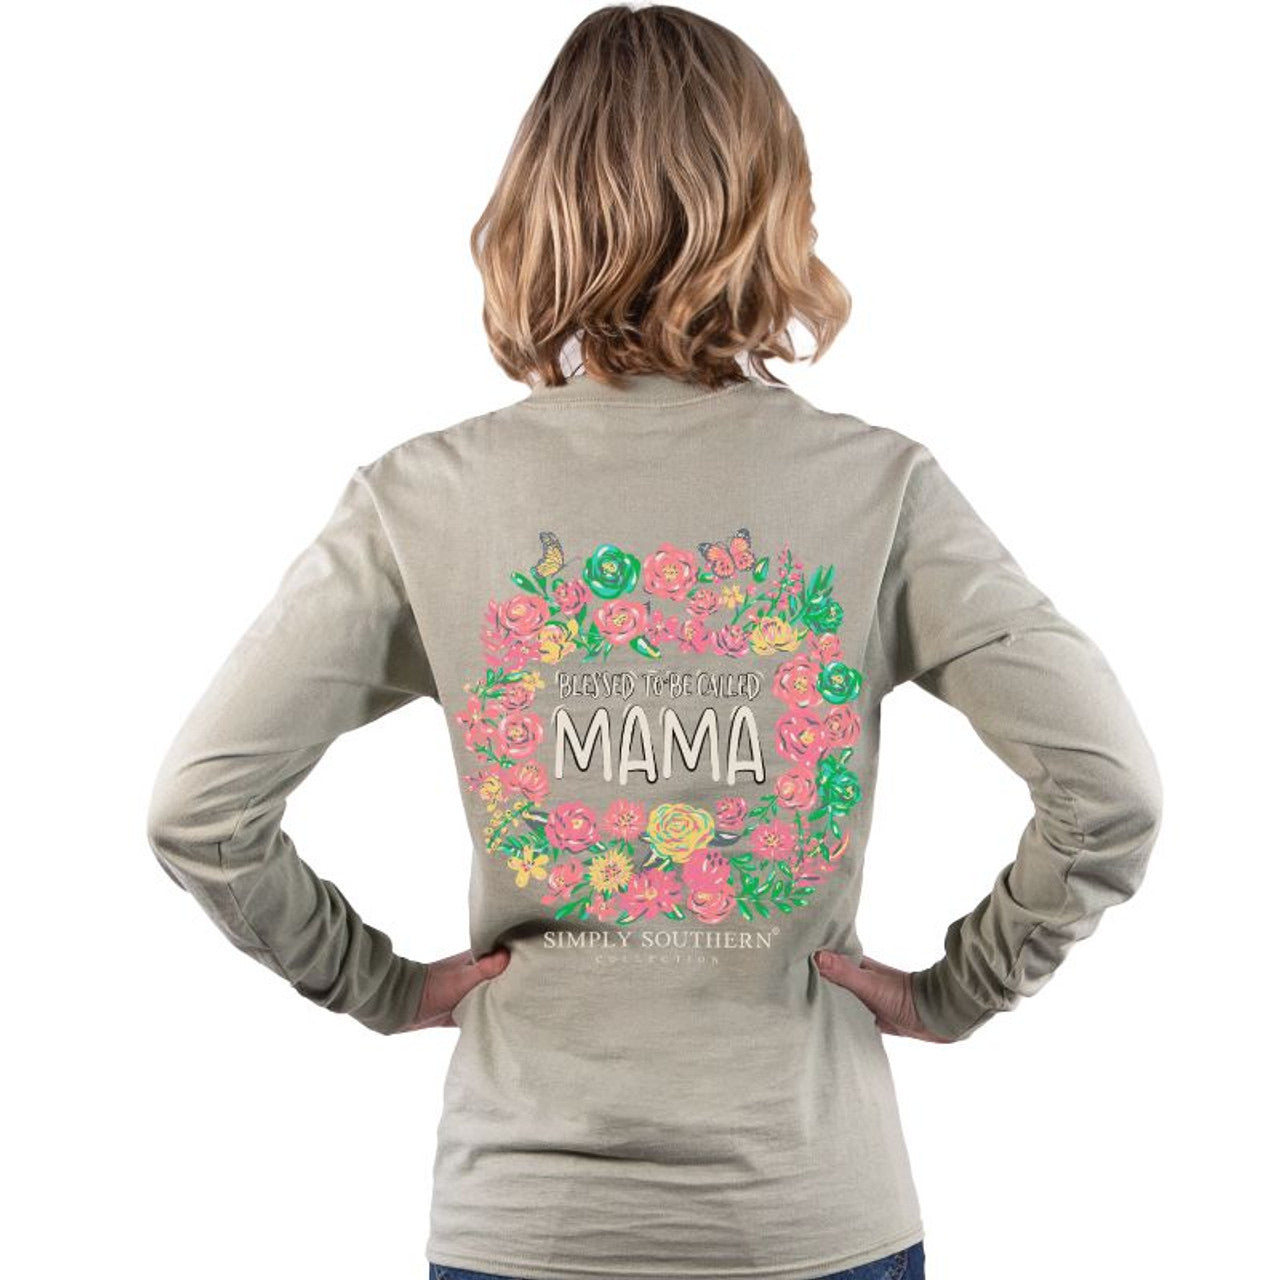 FINAL SALE - Simply Southern - Blessed to be Called Mama Long Sleeve Tee